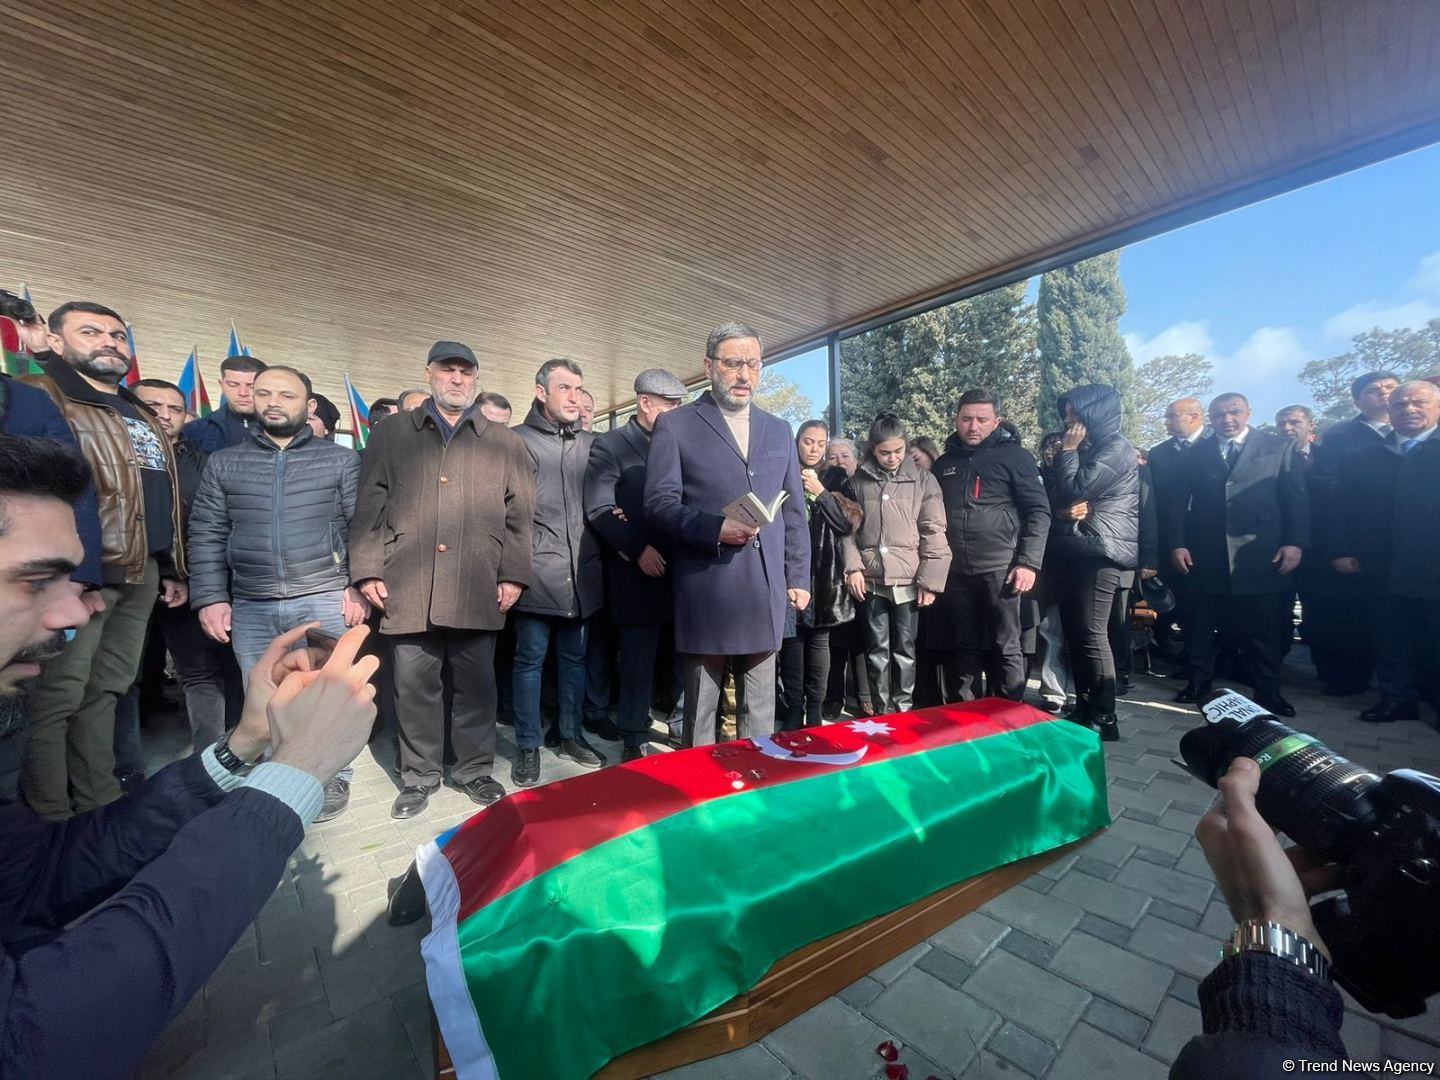 Funeral in Baku held for victim of terrorist attack in Iran, thousands gather to pay respect (PHOTO/VIDEO)